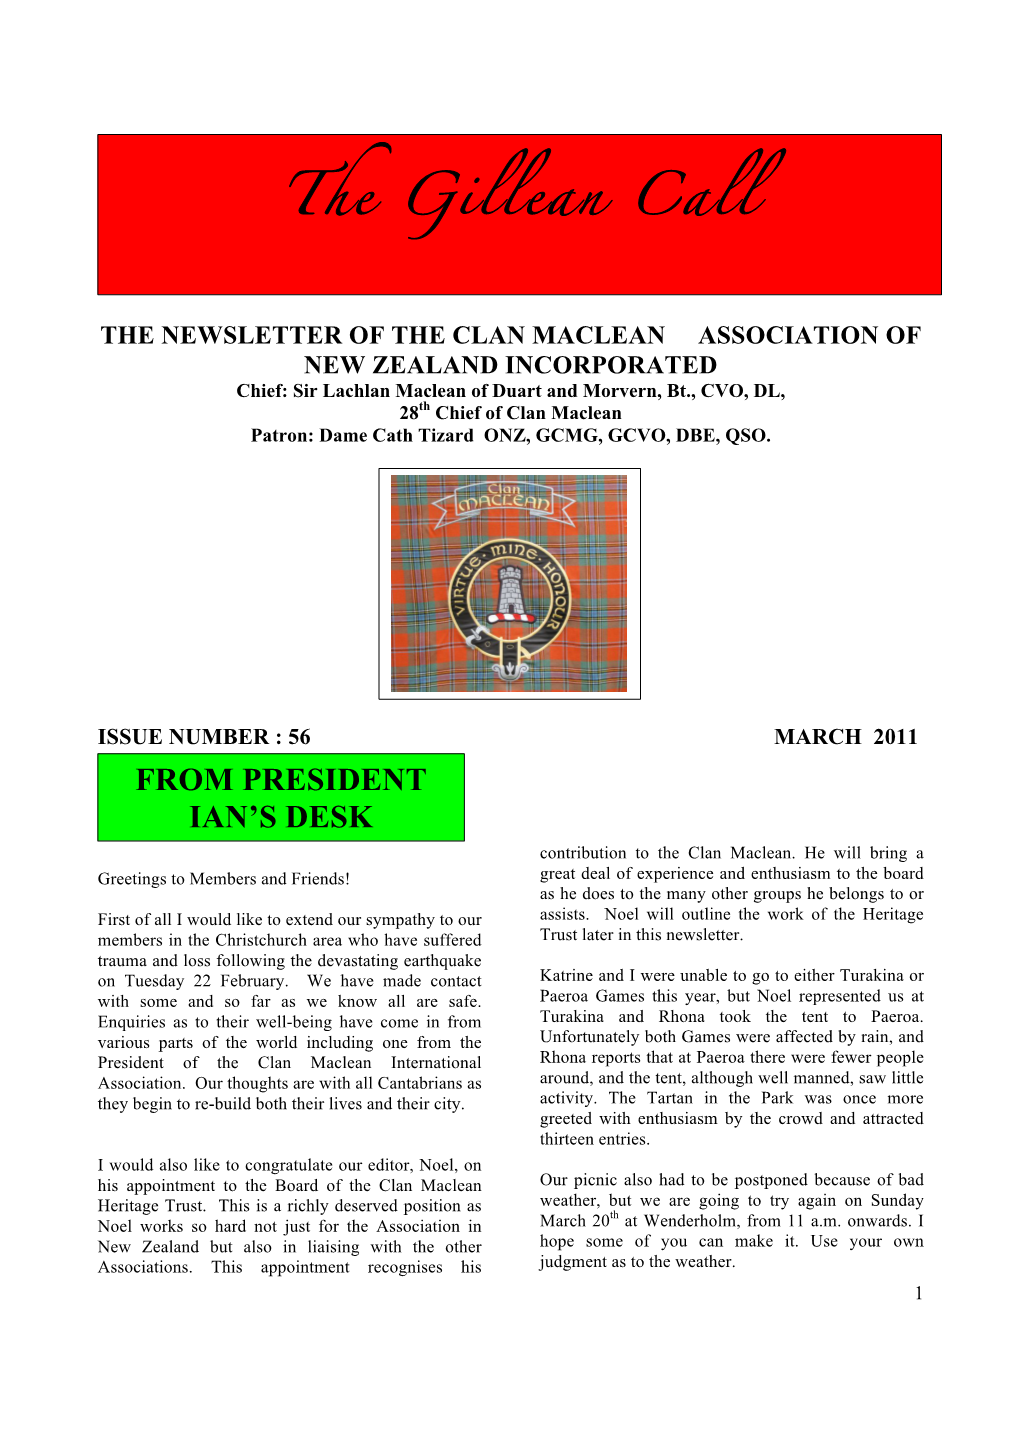 The Gillean Call No 56 March 2011